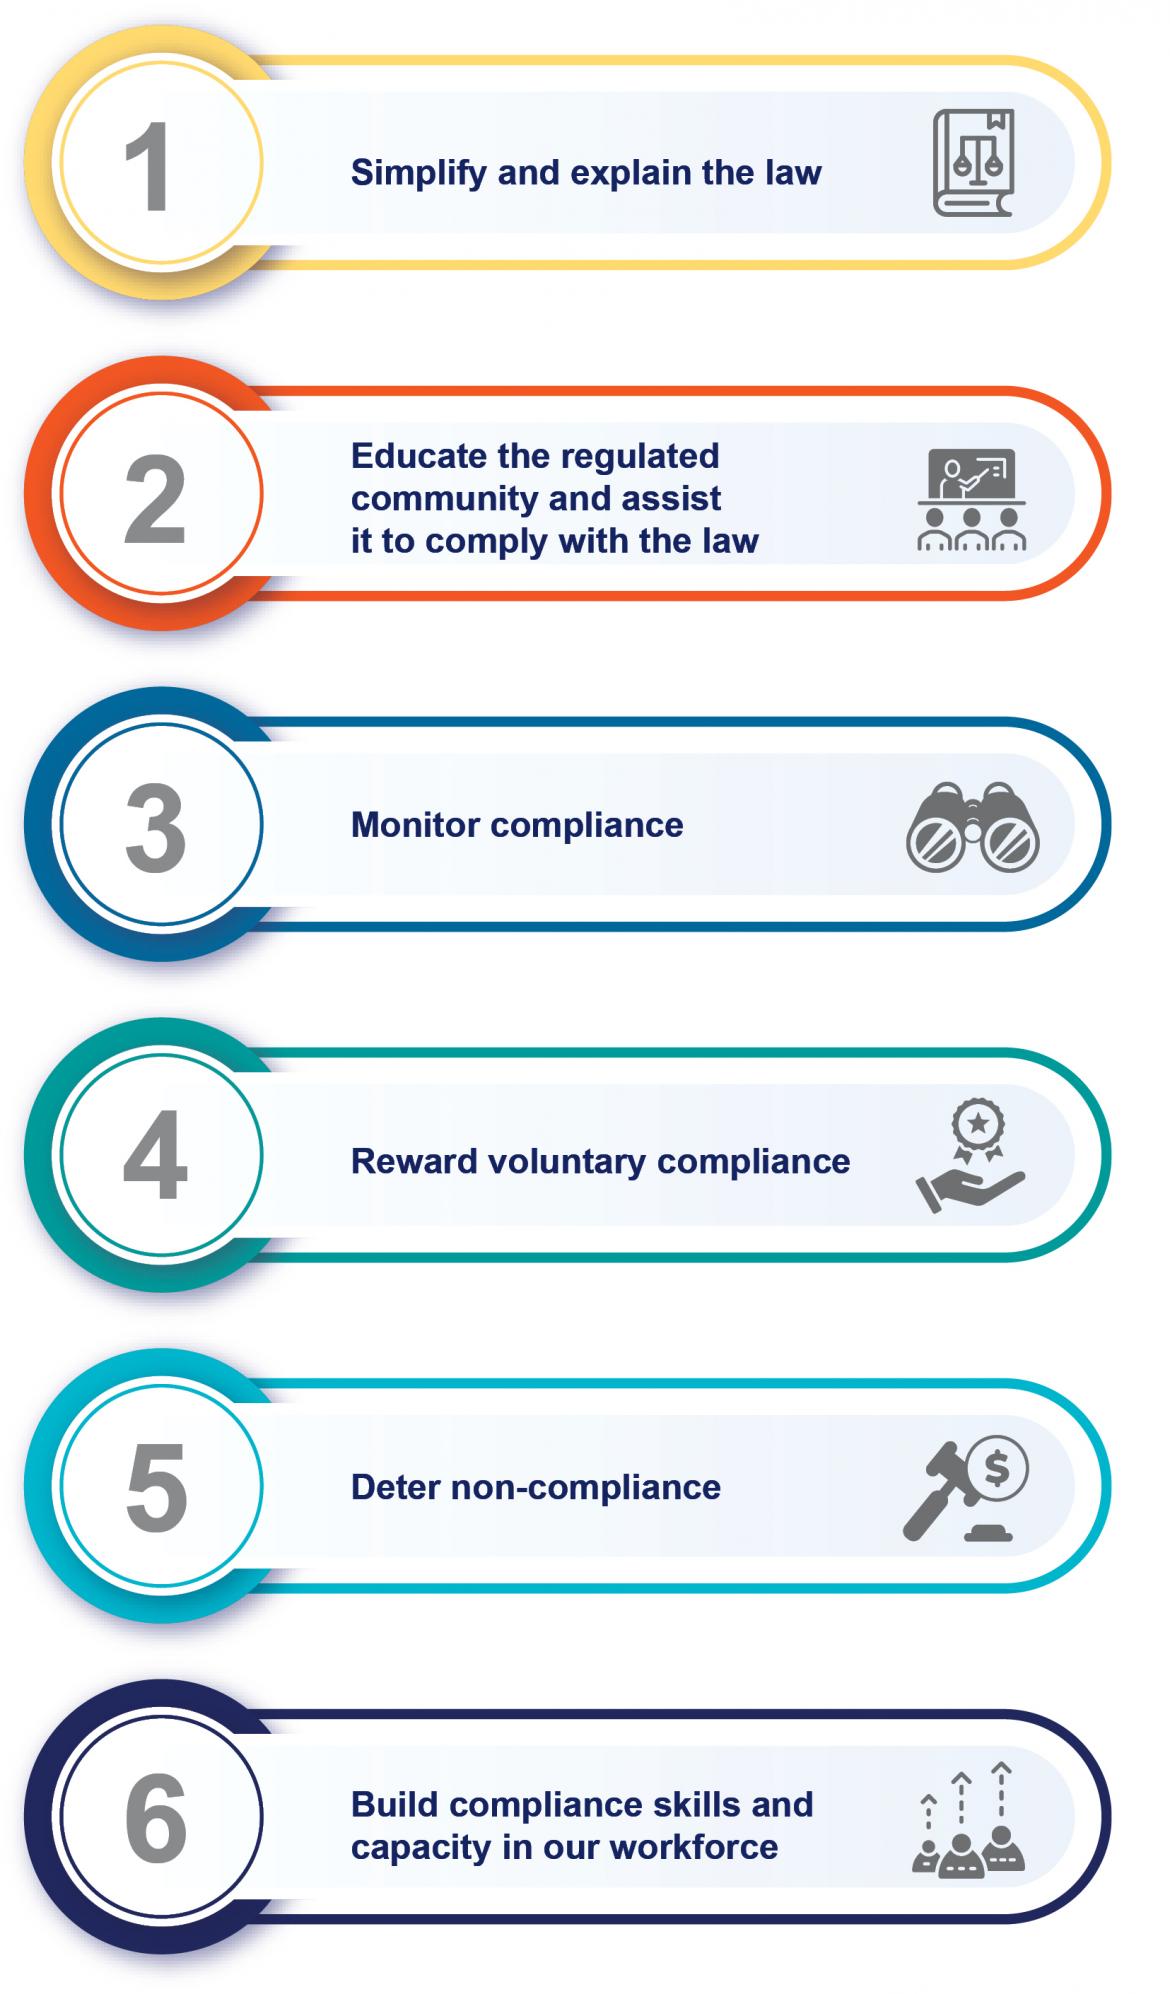 1 Simplify and explain the law. 2 Educate the regulated community and assist it comply with the law. 3. Monitor compliance. 4 Reward voluntary compliance. 5 Deter non-compliance. 6 Build compliance skills and capacity in our workforce